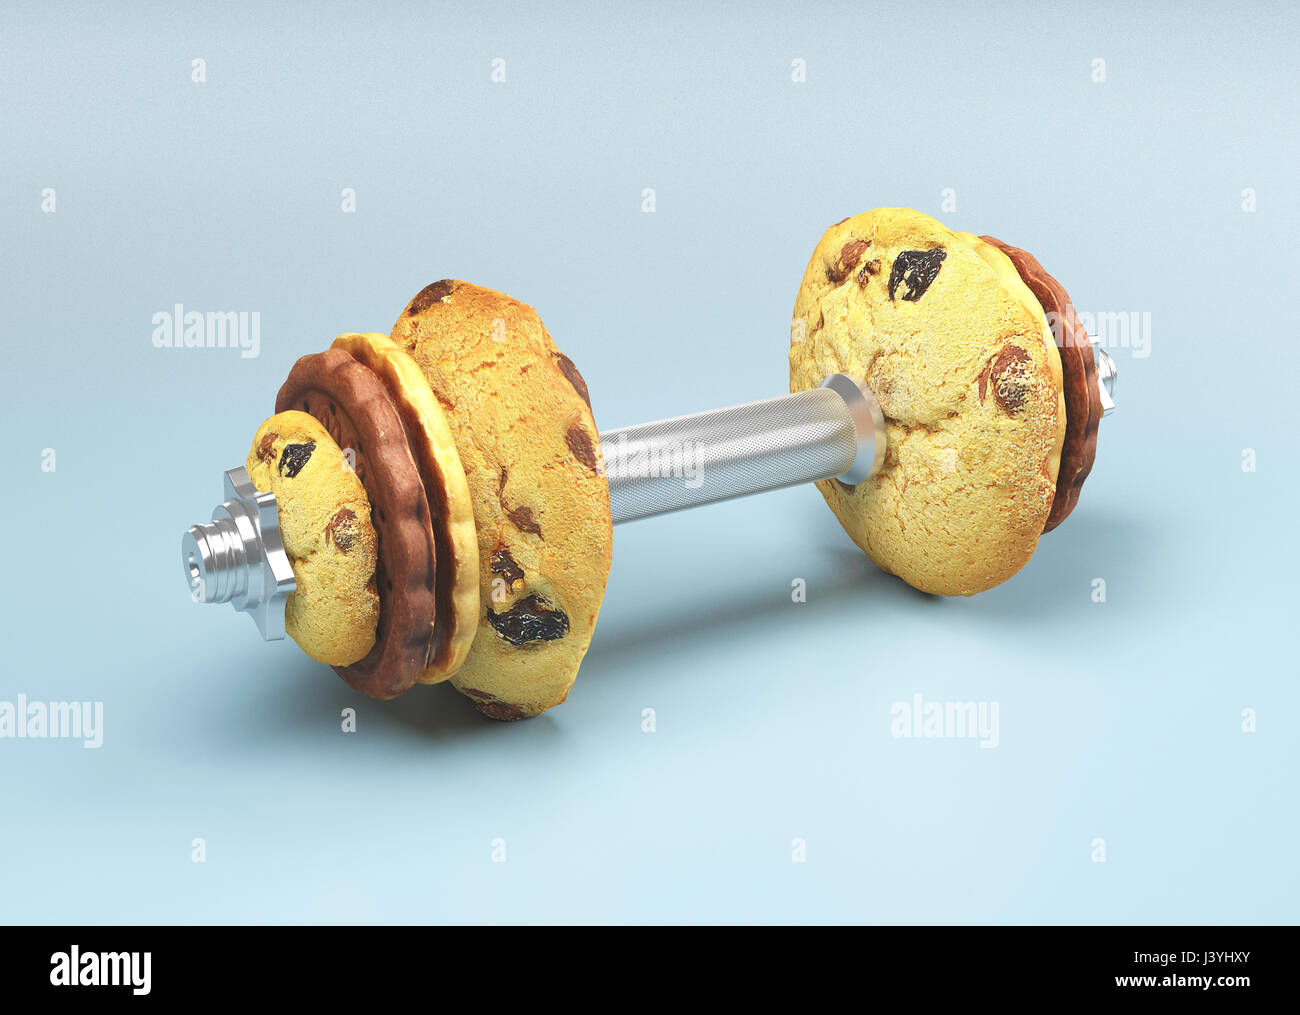 Gym weight make with cookies, diet Stock Photo